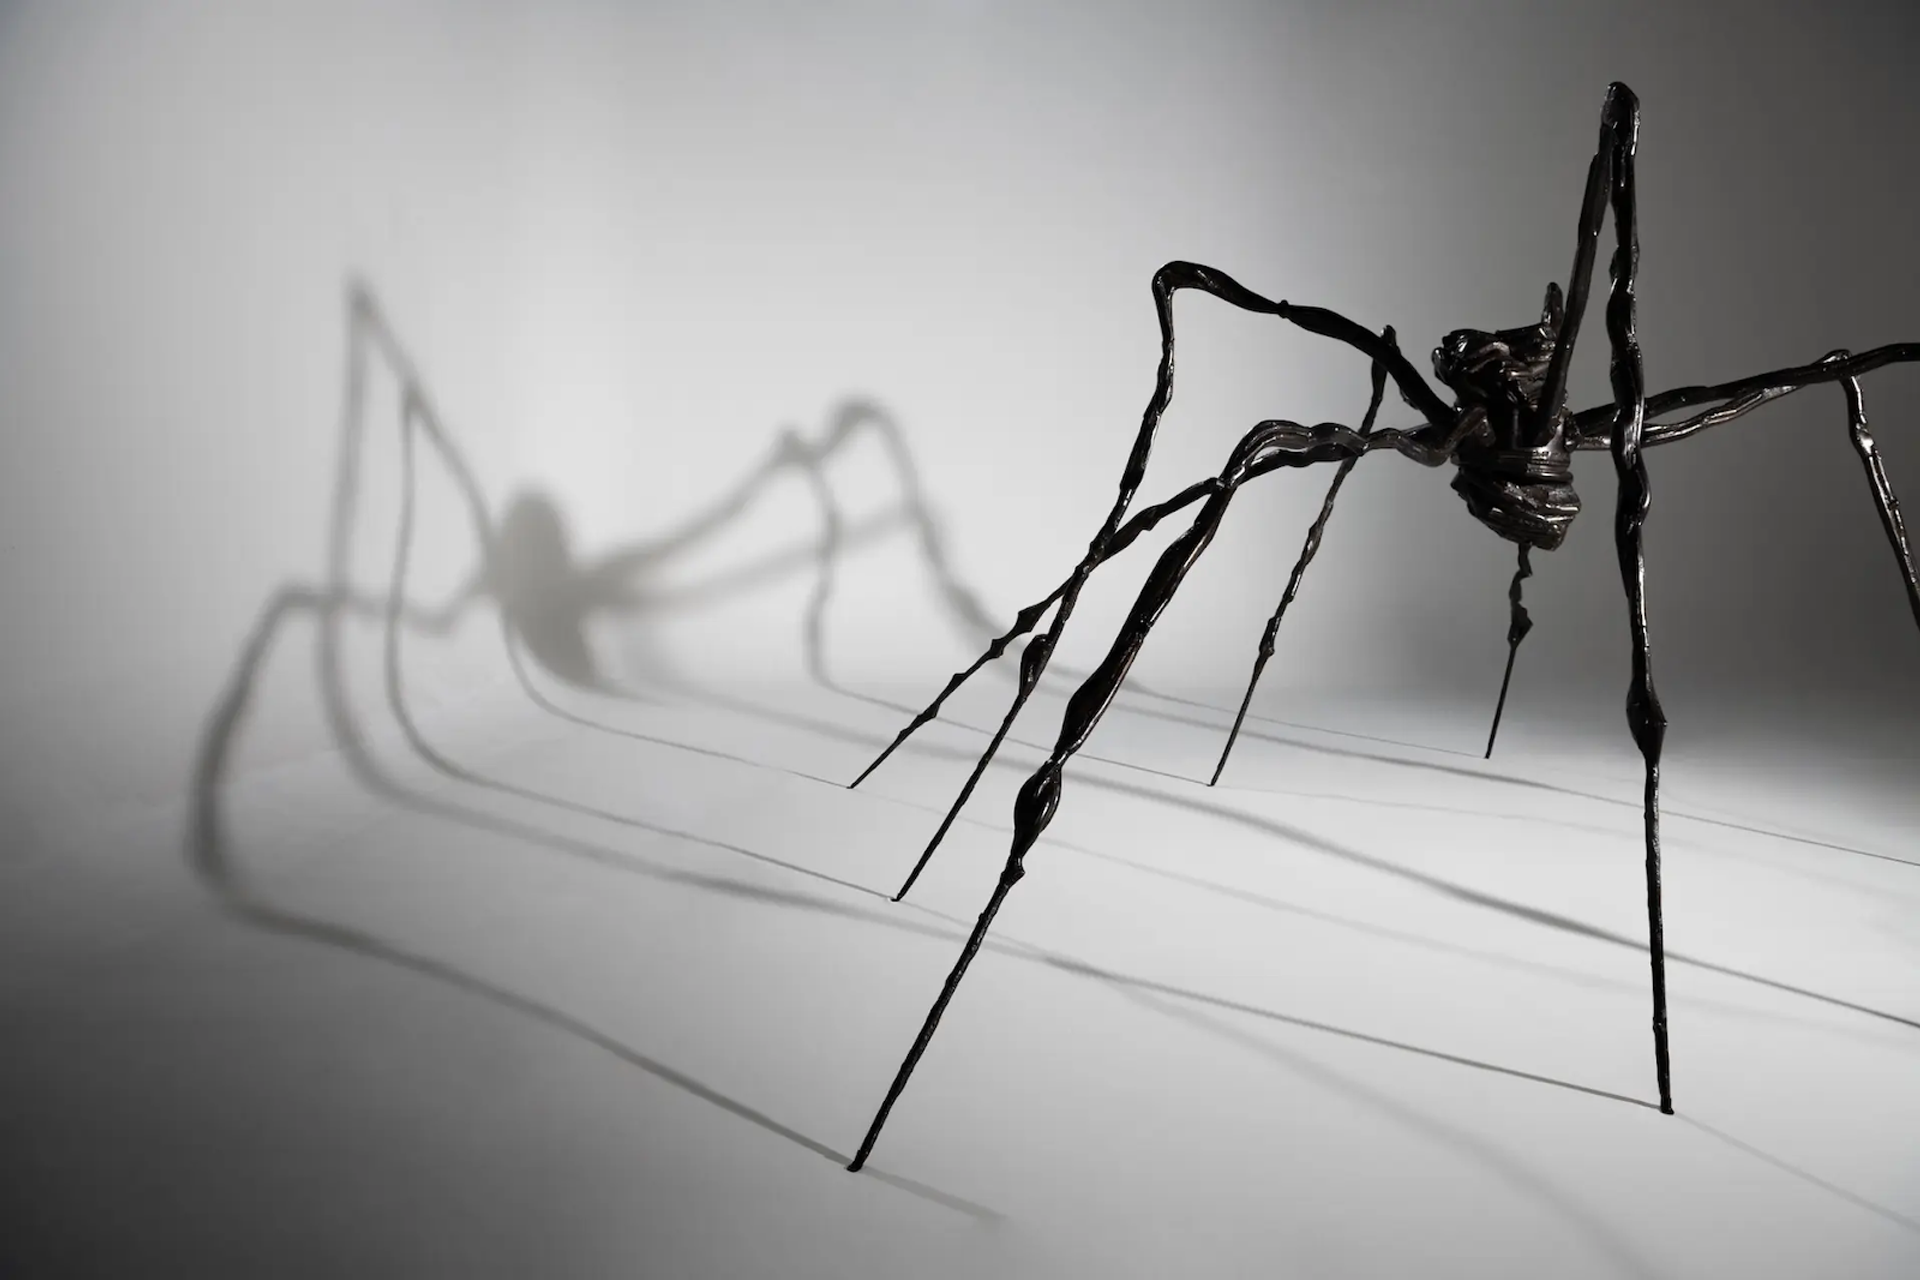 Black and white photograph of Louise Bourgeois Spider sculpture. An oversized spider sculpture with an apparent shadow due to the lighting in the photo.